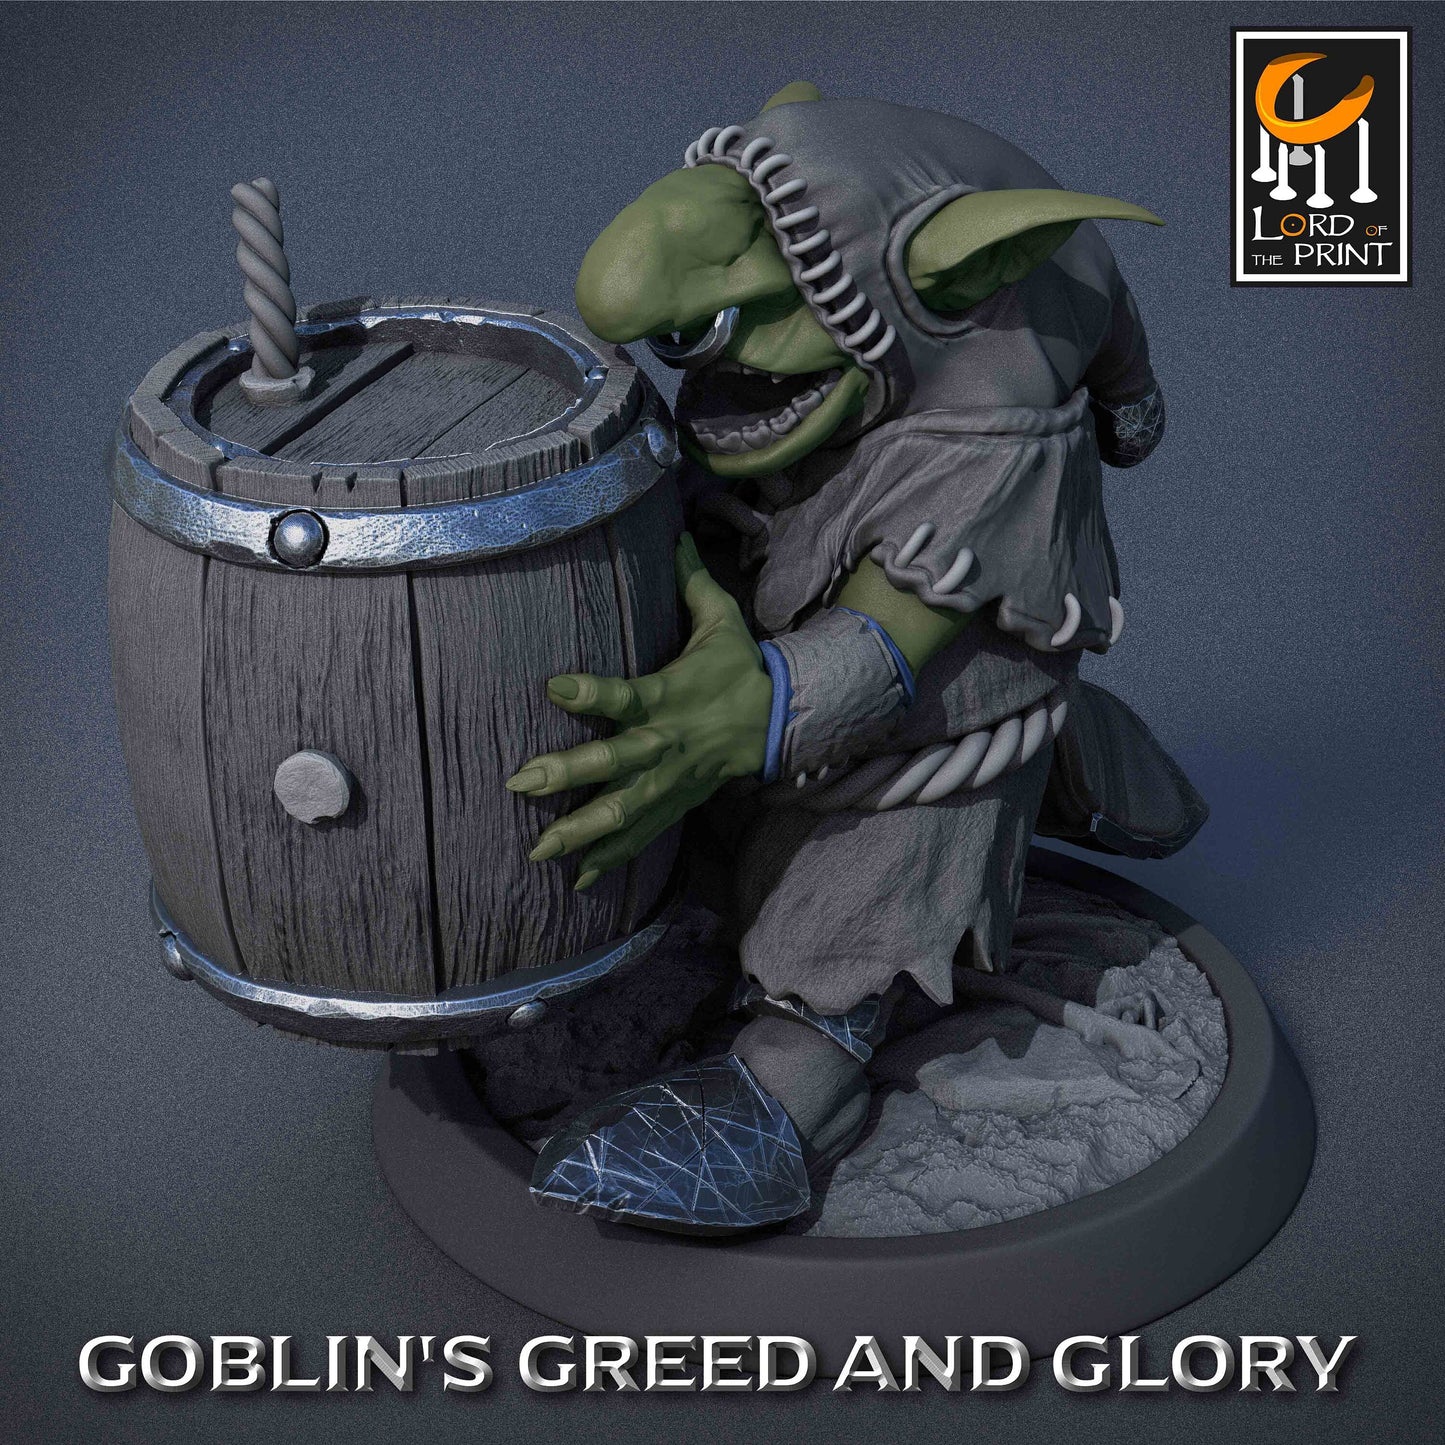 Goblin Monks (Set A) by Lord of the Print | Please Read Description